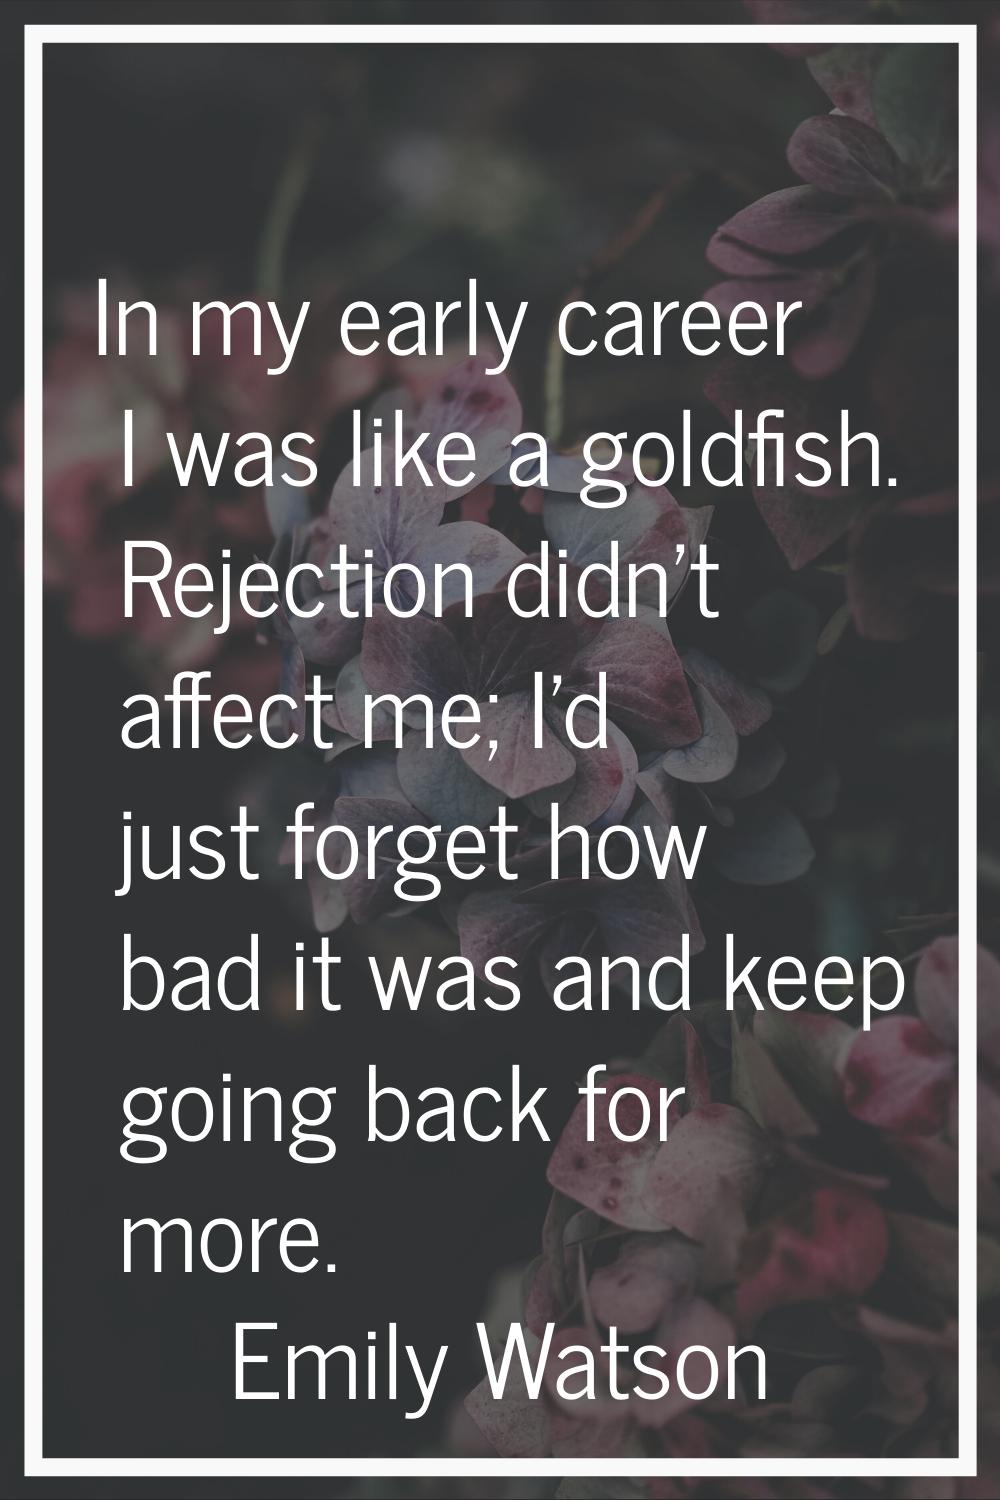 In my early career I was like a goldfish. Rejection didn't affect me; I'd just forget how bad it wa